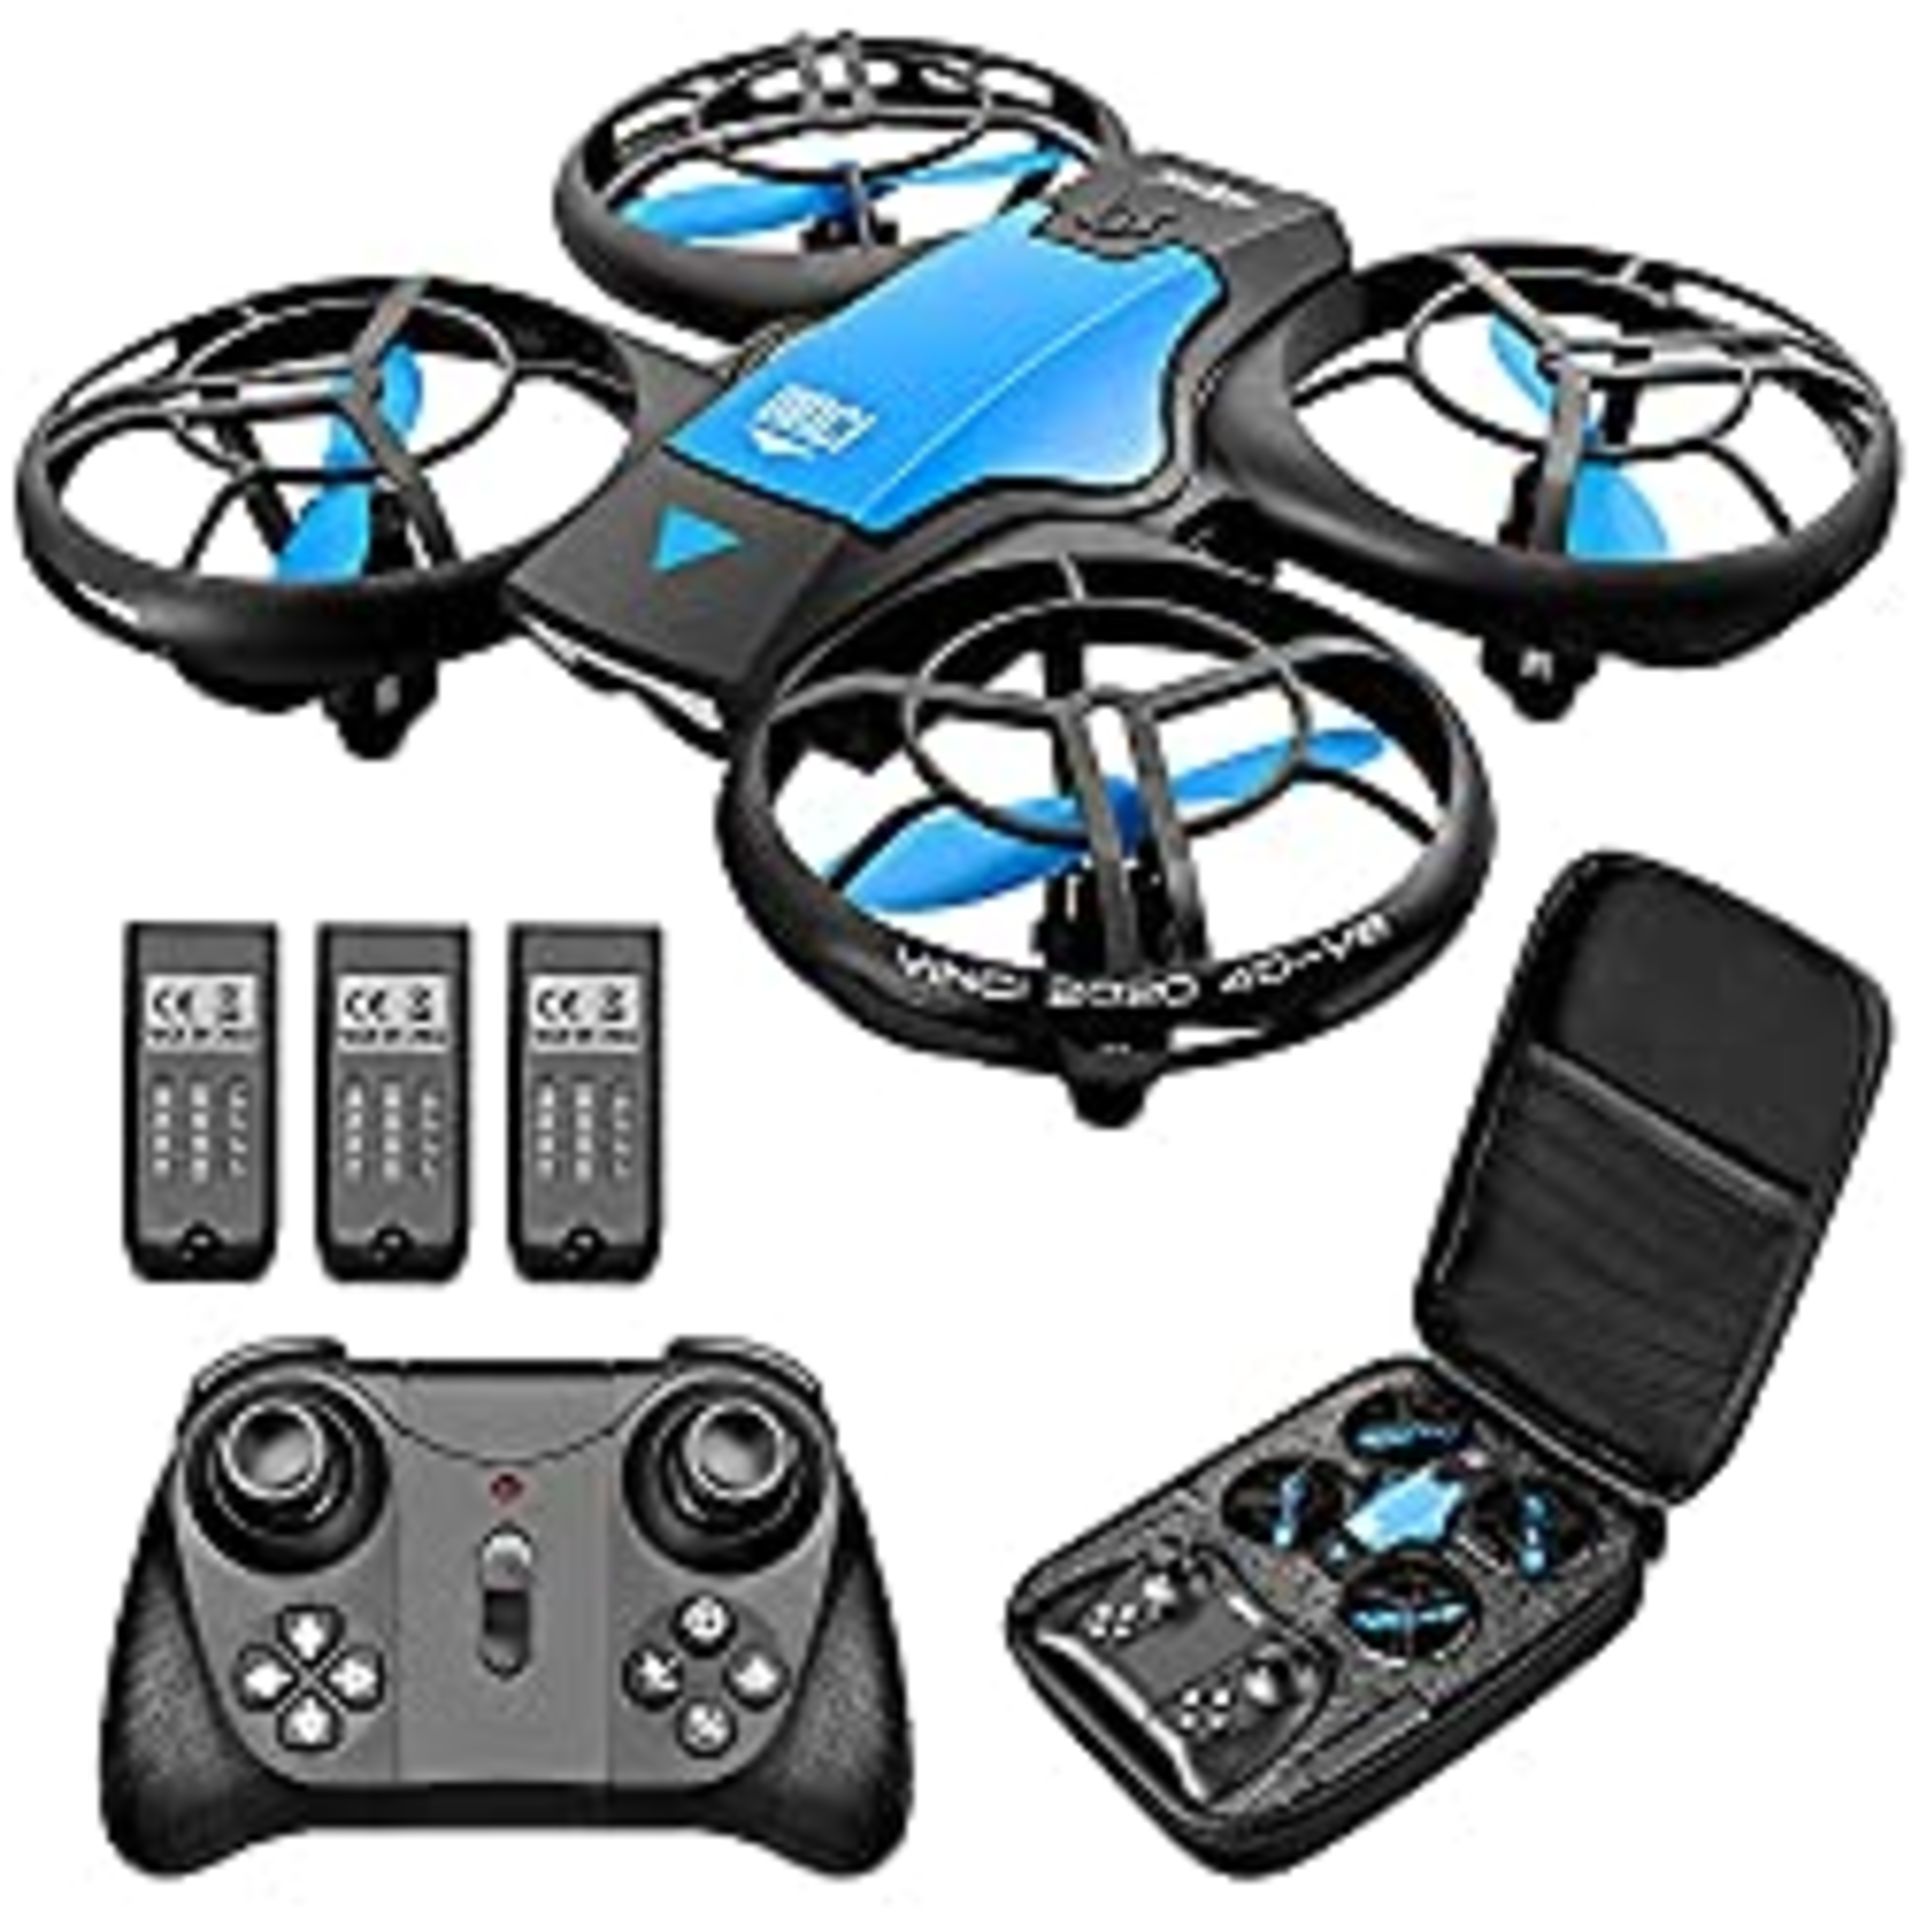 RRP £35.37 4DRC Mini Drone for Kids Hand Operated RC Quadcopter